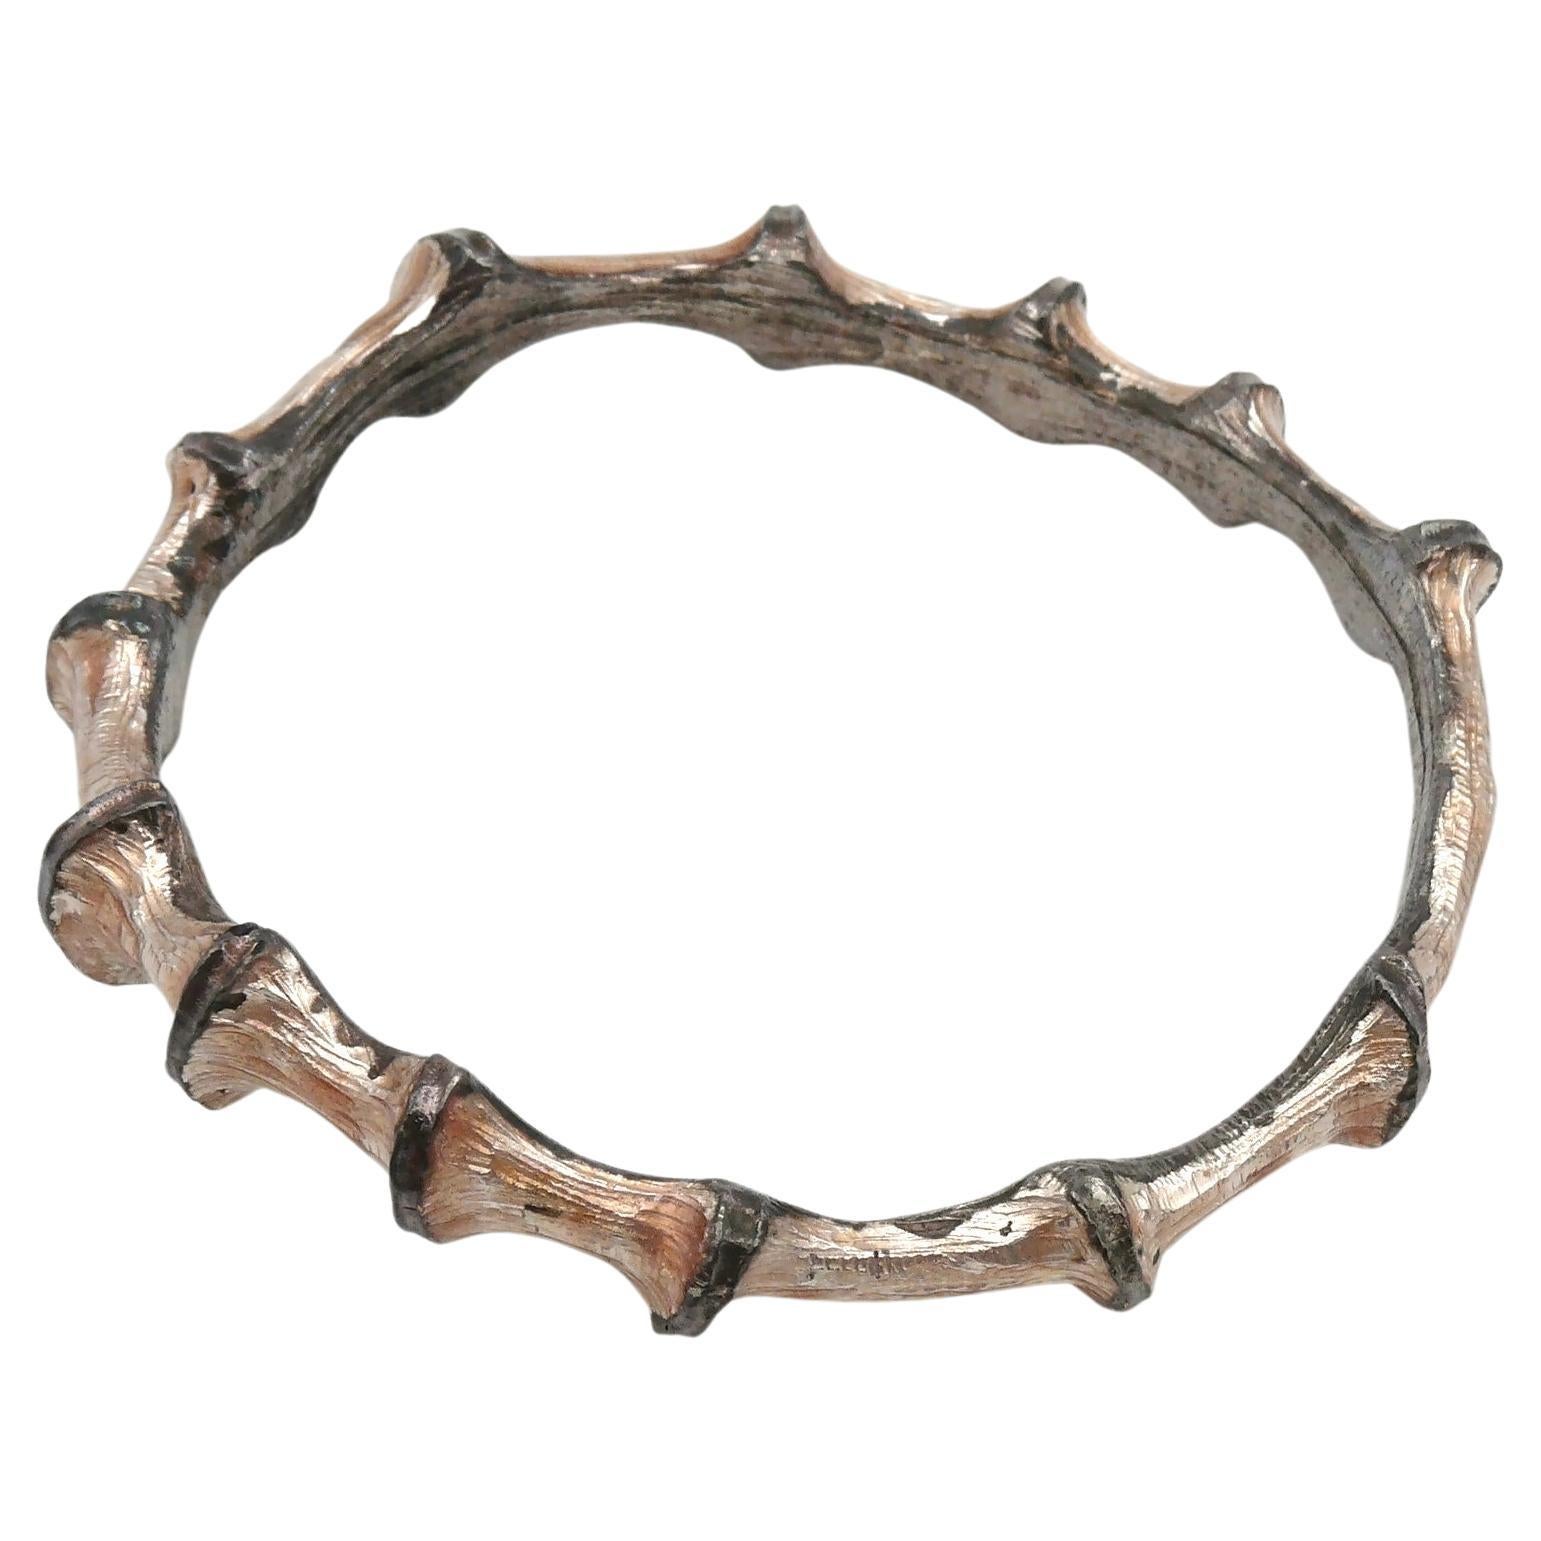 CHRISTIAN LACROIX Attributed To Vintage Distressed Bamboo Design Bangle Bracelet For Sale